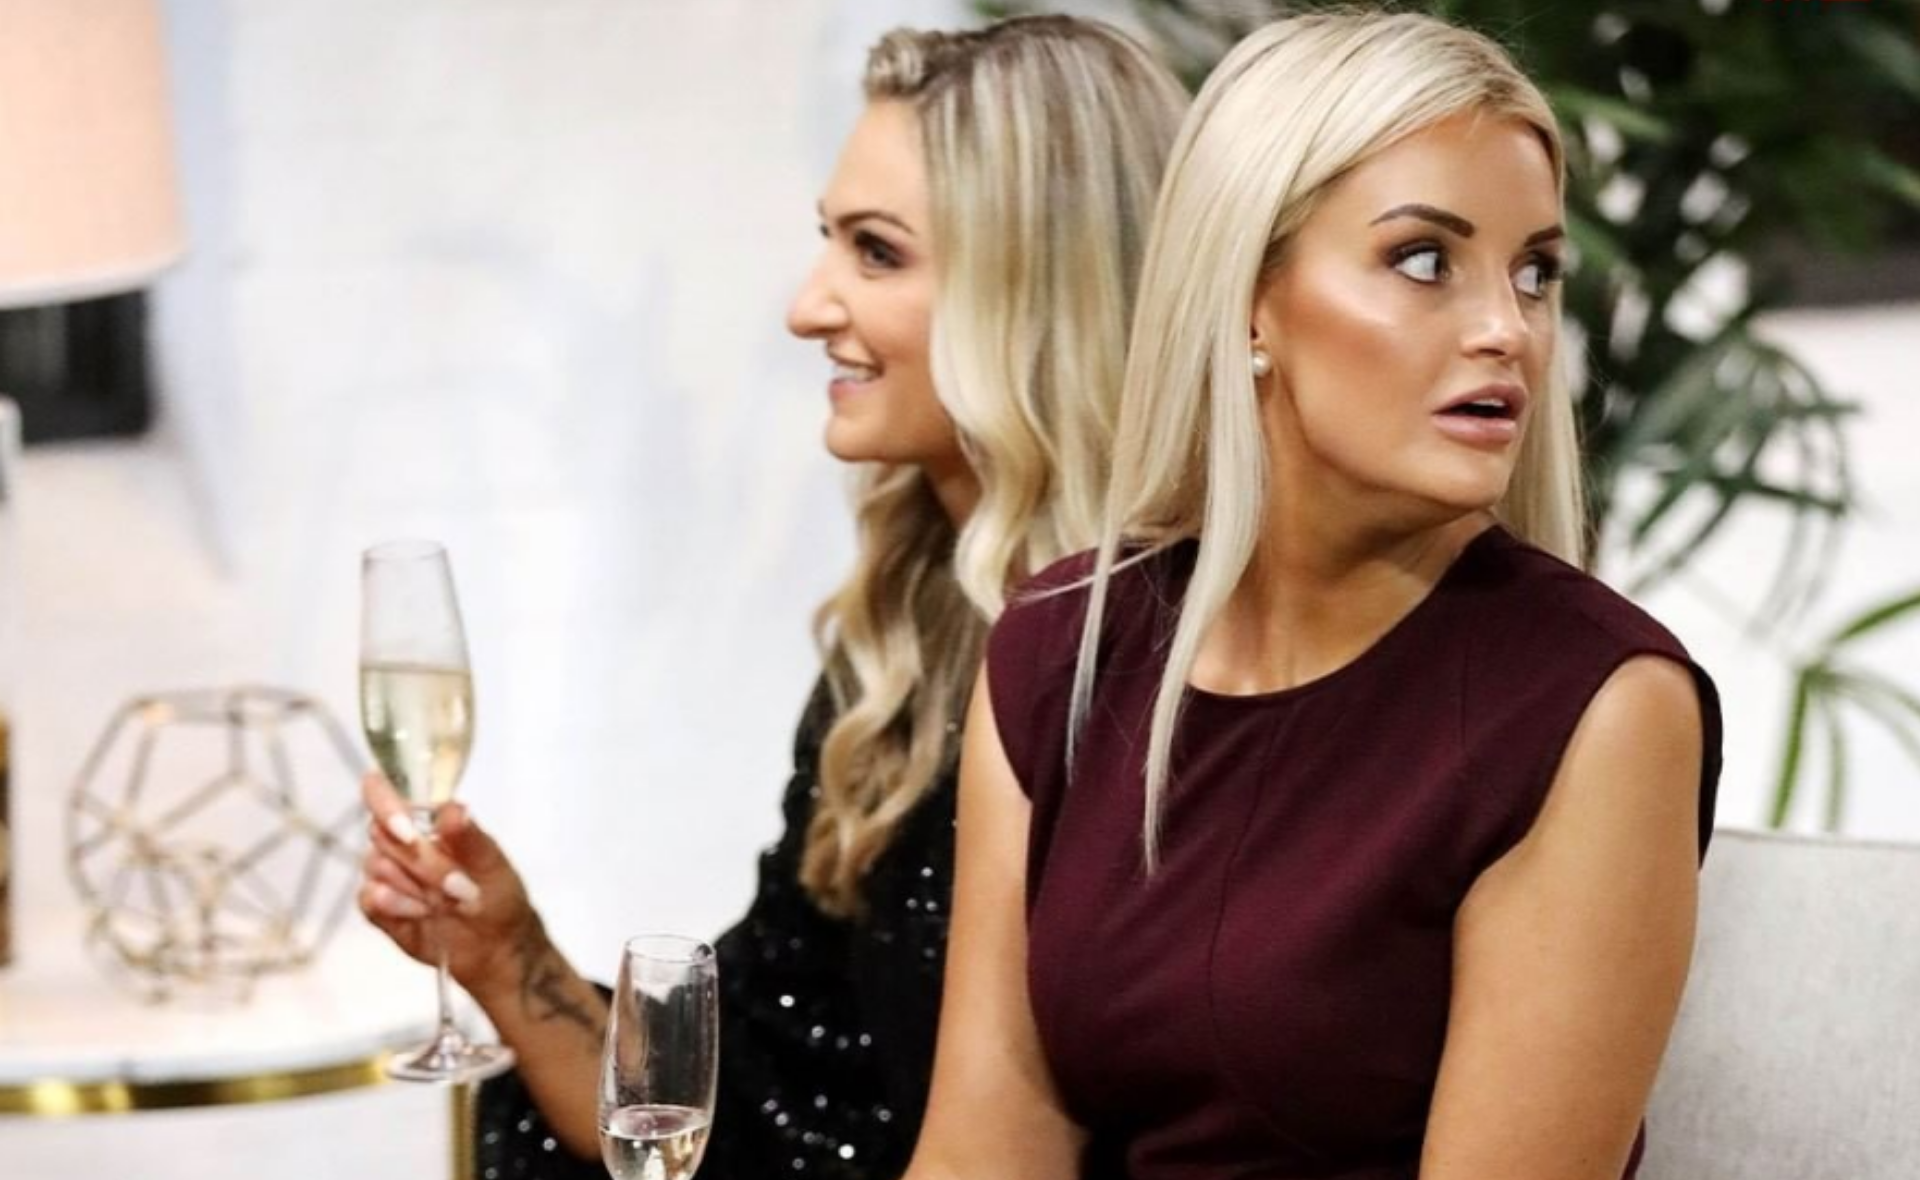 EXCLUSIVE: Married At First Sight’s Samantha discovered the truth about Coco and Cam’s kiss post-show